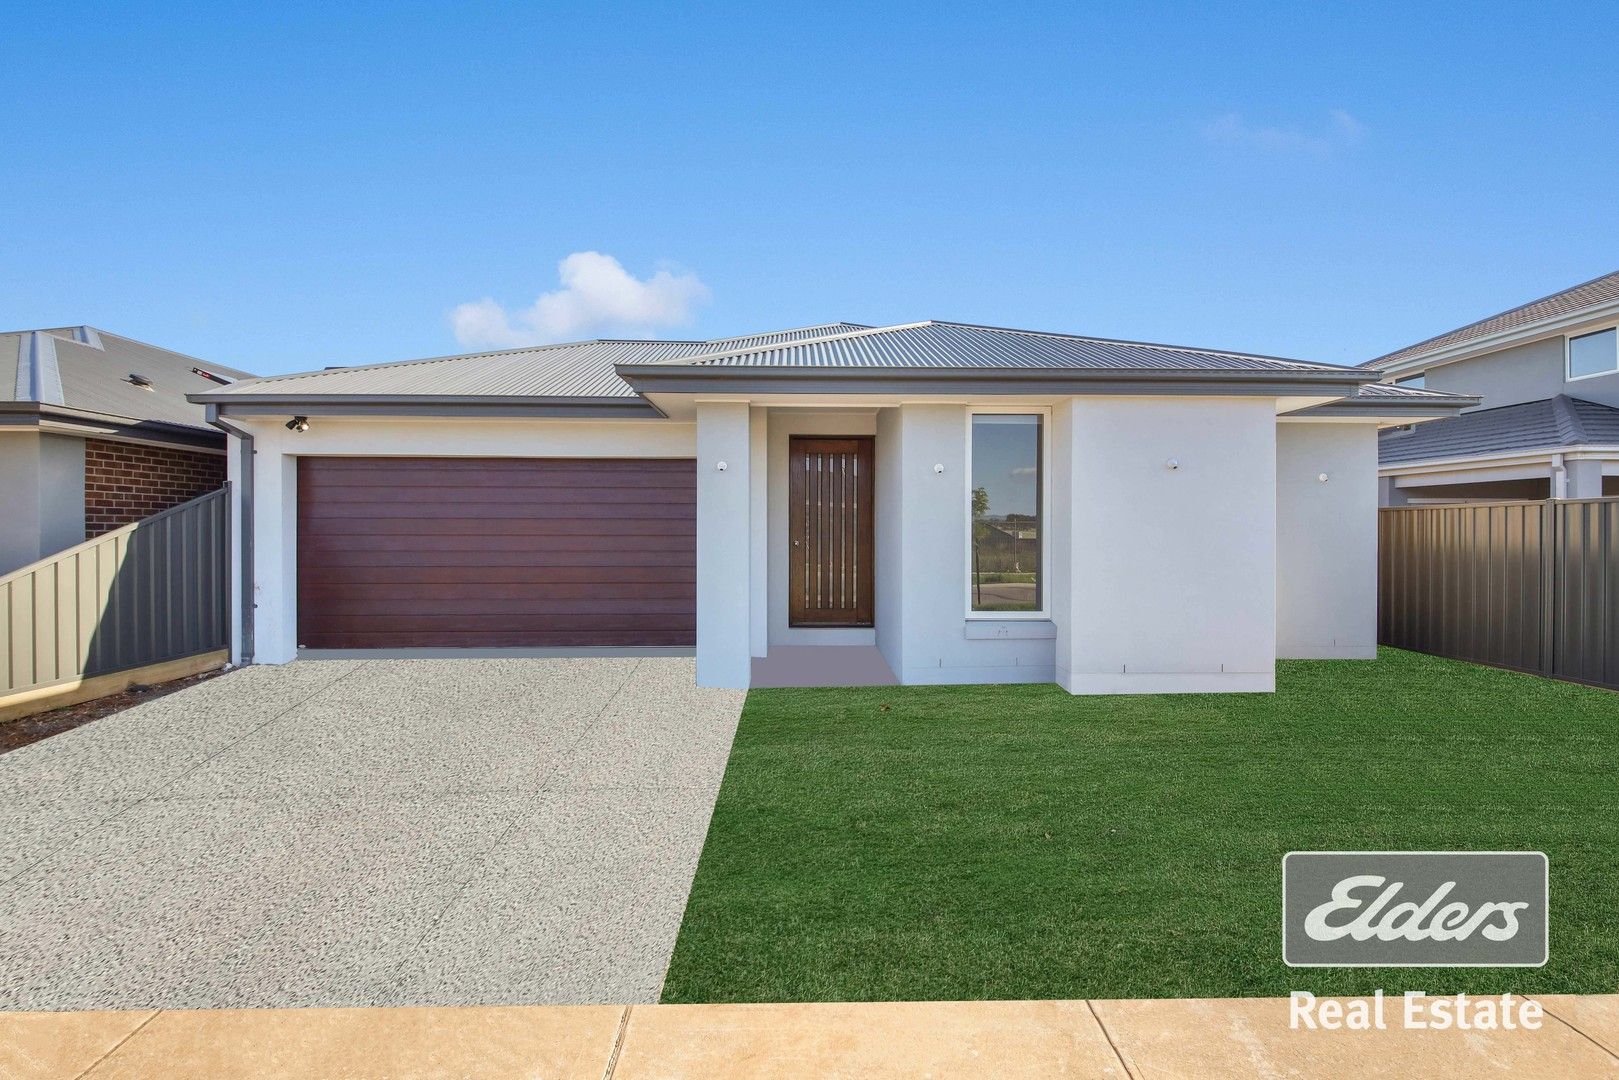 4 bedrooms House in 23 Ranelagh Avenue STRATHTULLOH VIC, 3338